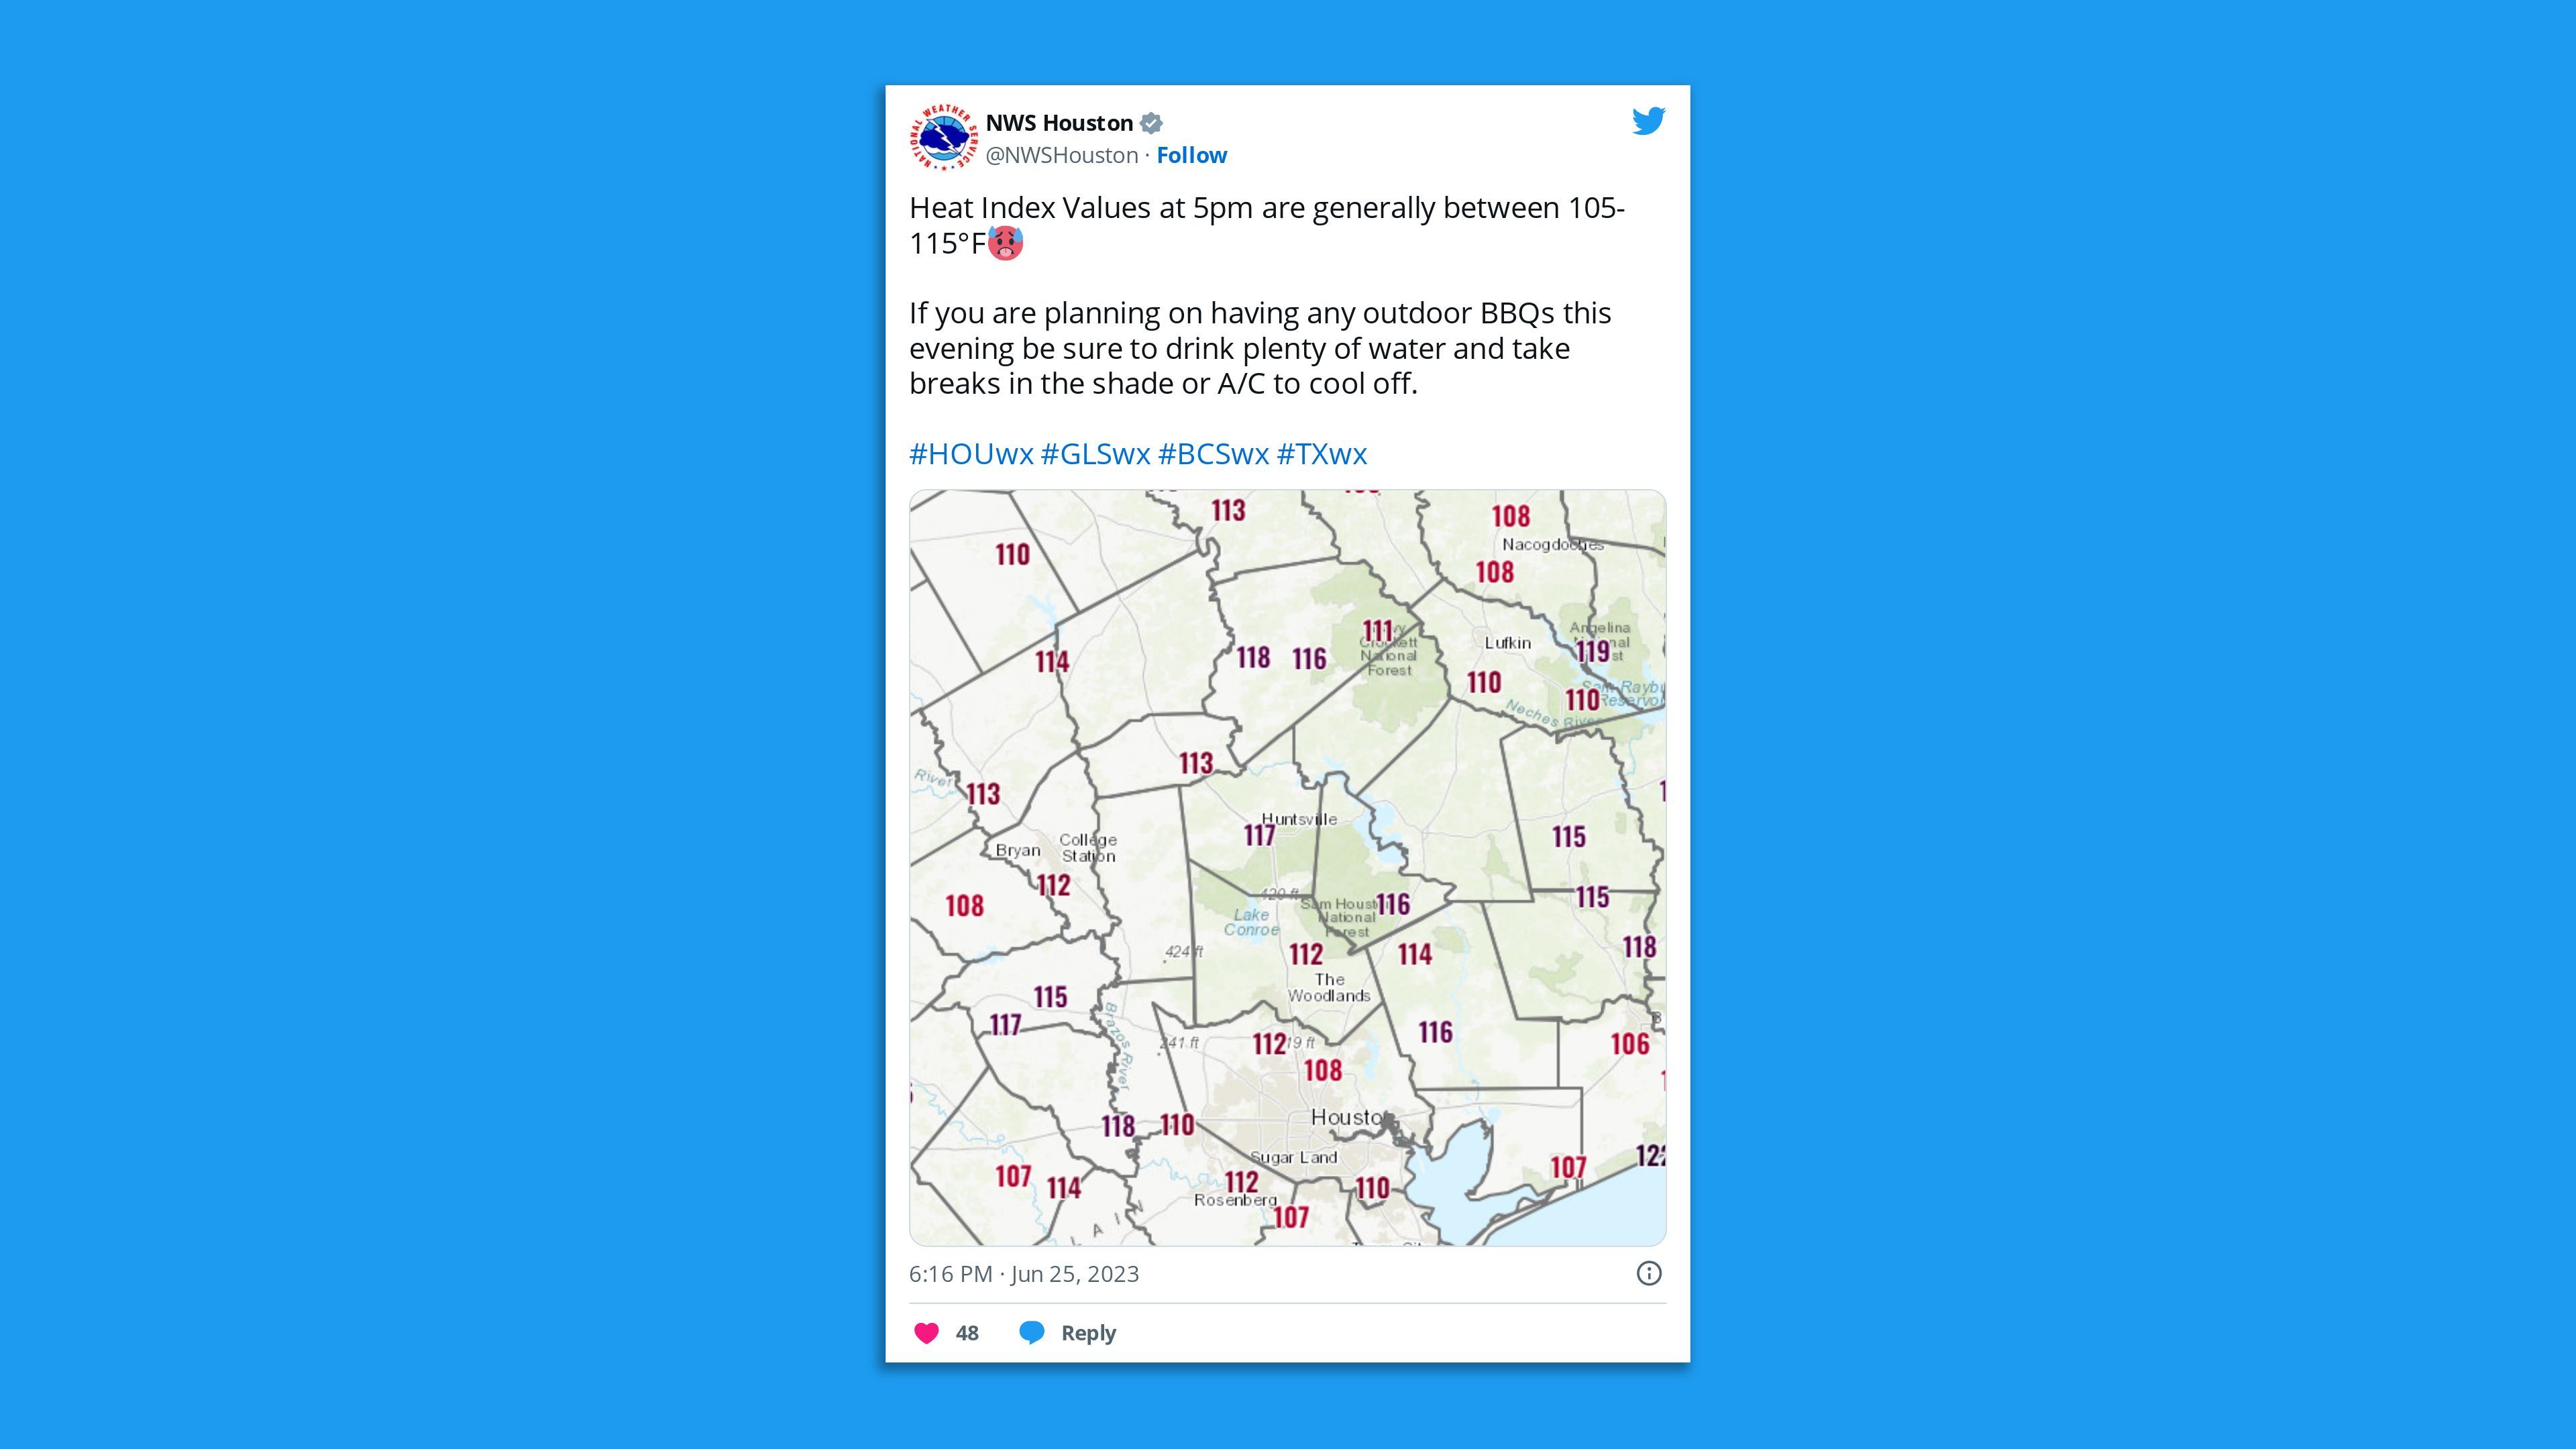 A screenshot of a tweet by NWS Houston, saying: "Heat Index Values at 5pm are generally between 105-115°F🥵  If you are planning on having any outdoor BBQs this evening be sure to drink plenty of water and take breaks in the shade or A/C to cool off."